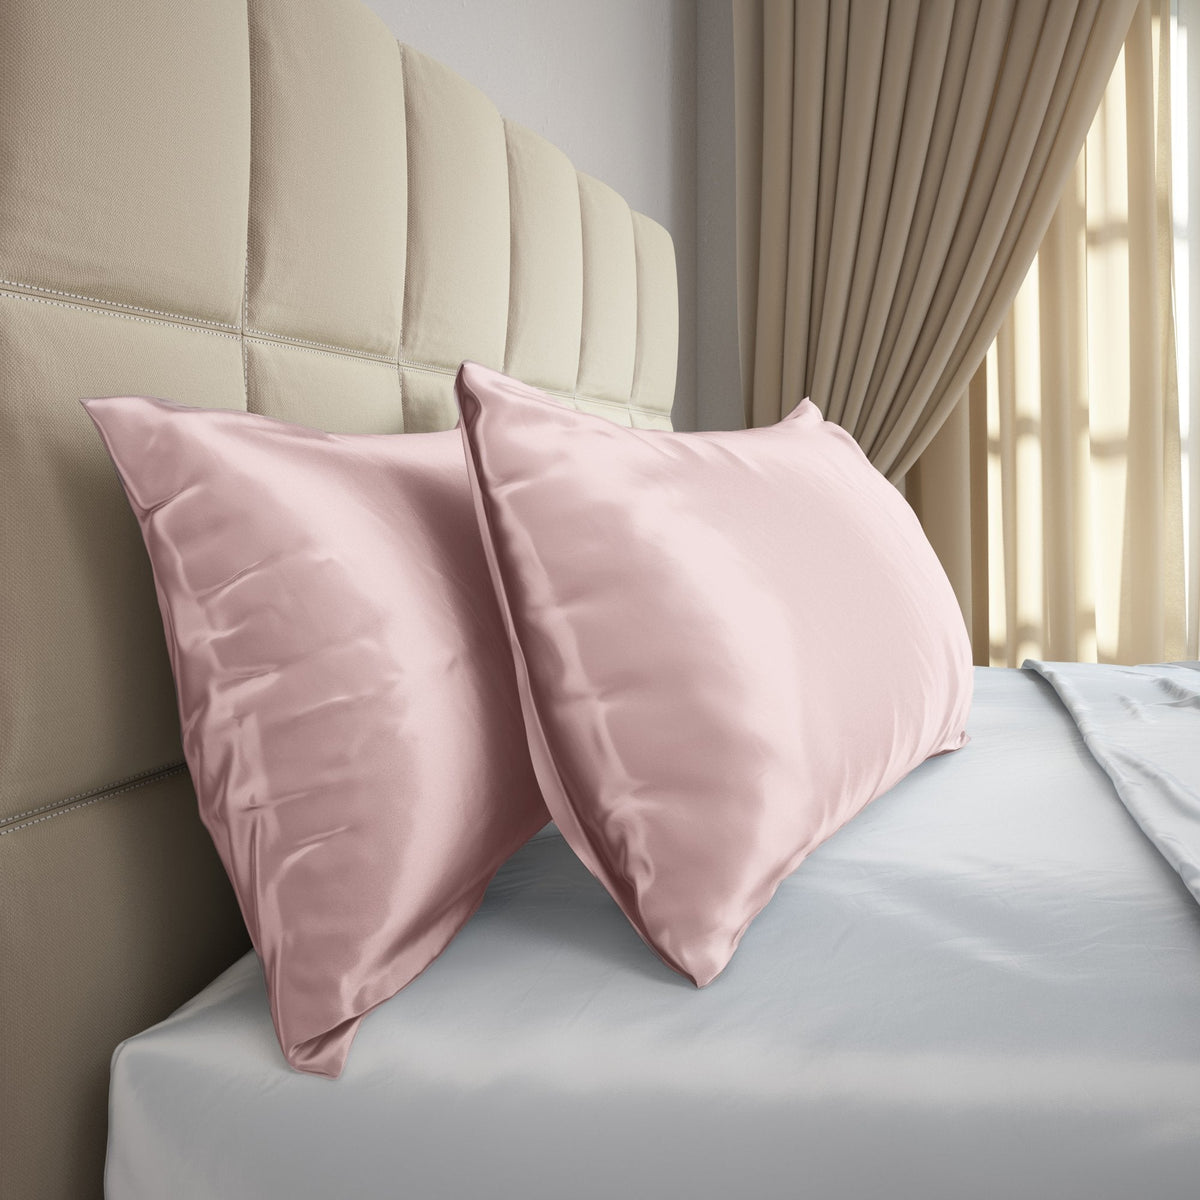 Mulberry Park Silks 19 Momme Pillowcase Pinki Bed- Side